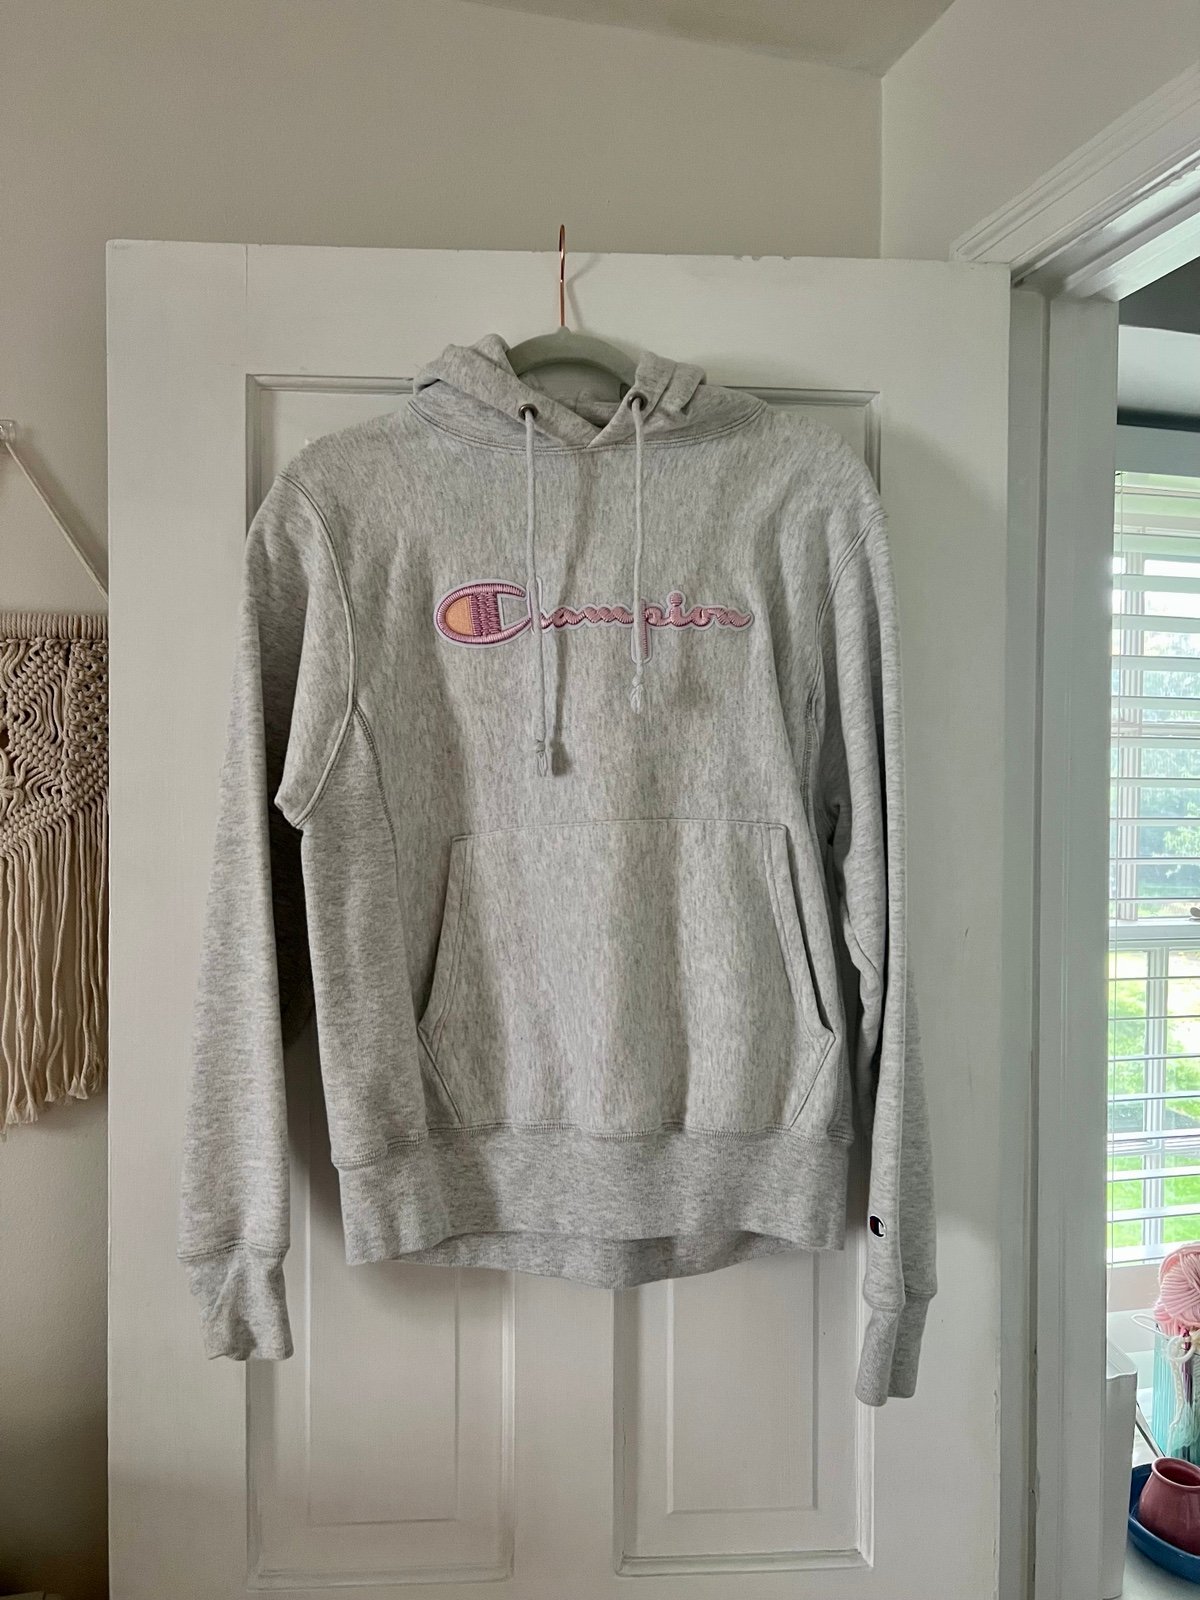 Classic Pink Champion Hoodie FpOQM36JX Outlet Store